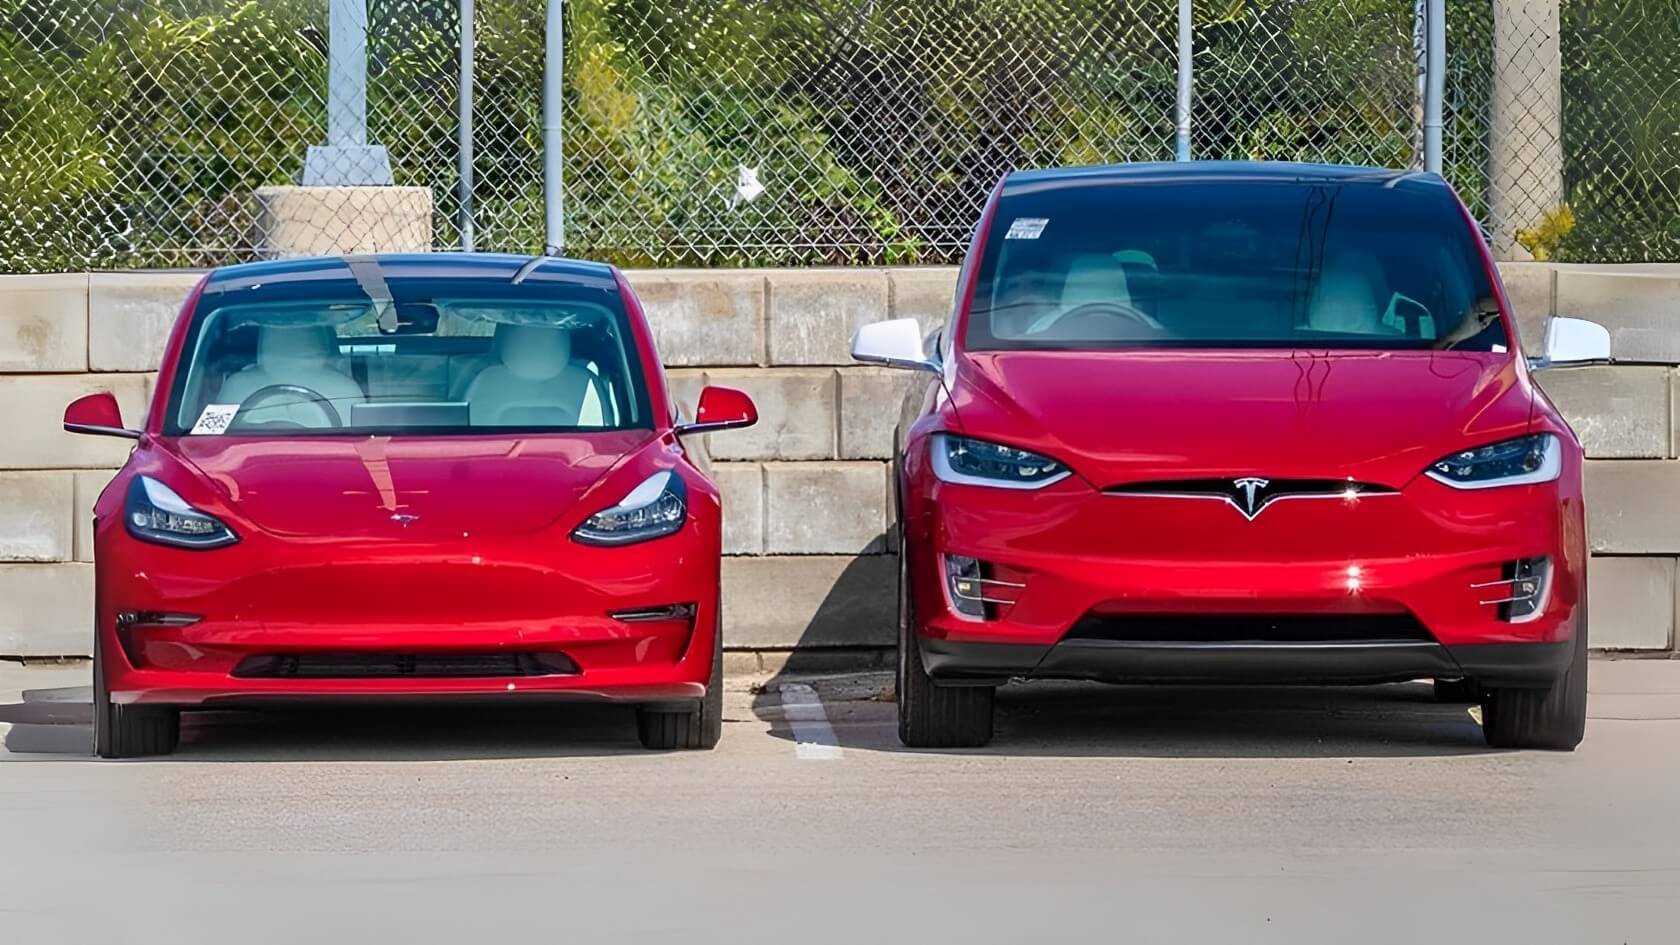 Man Tricked Tesla into Delivering 5 Cars Worth $560,000